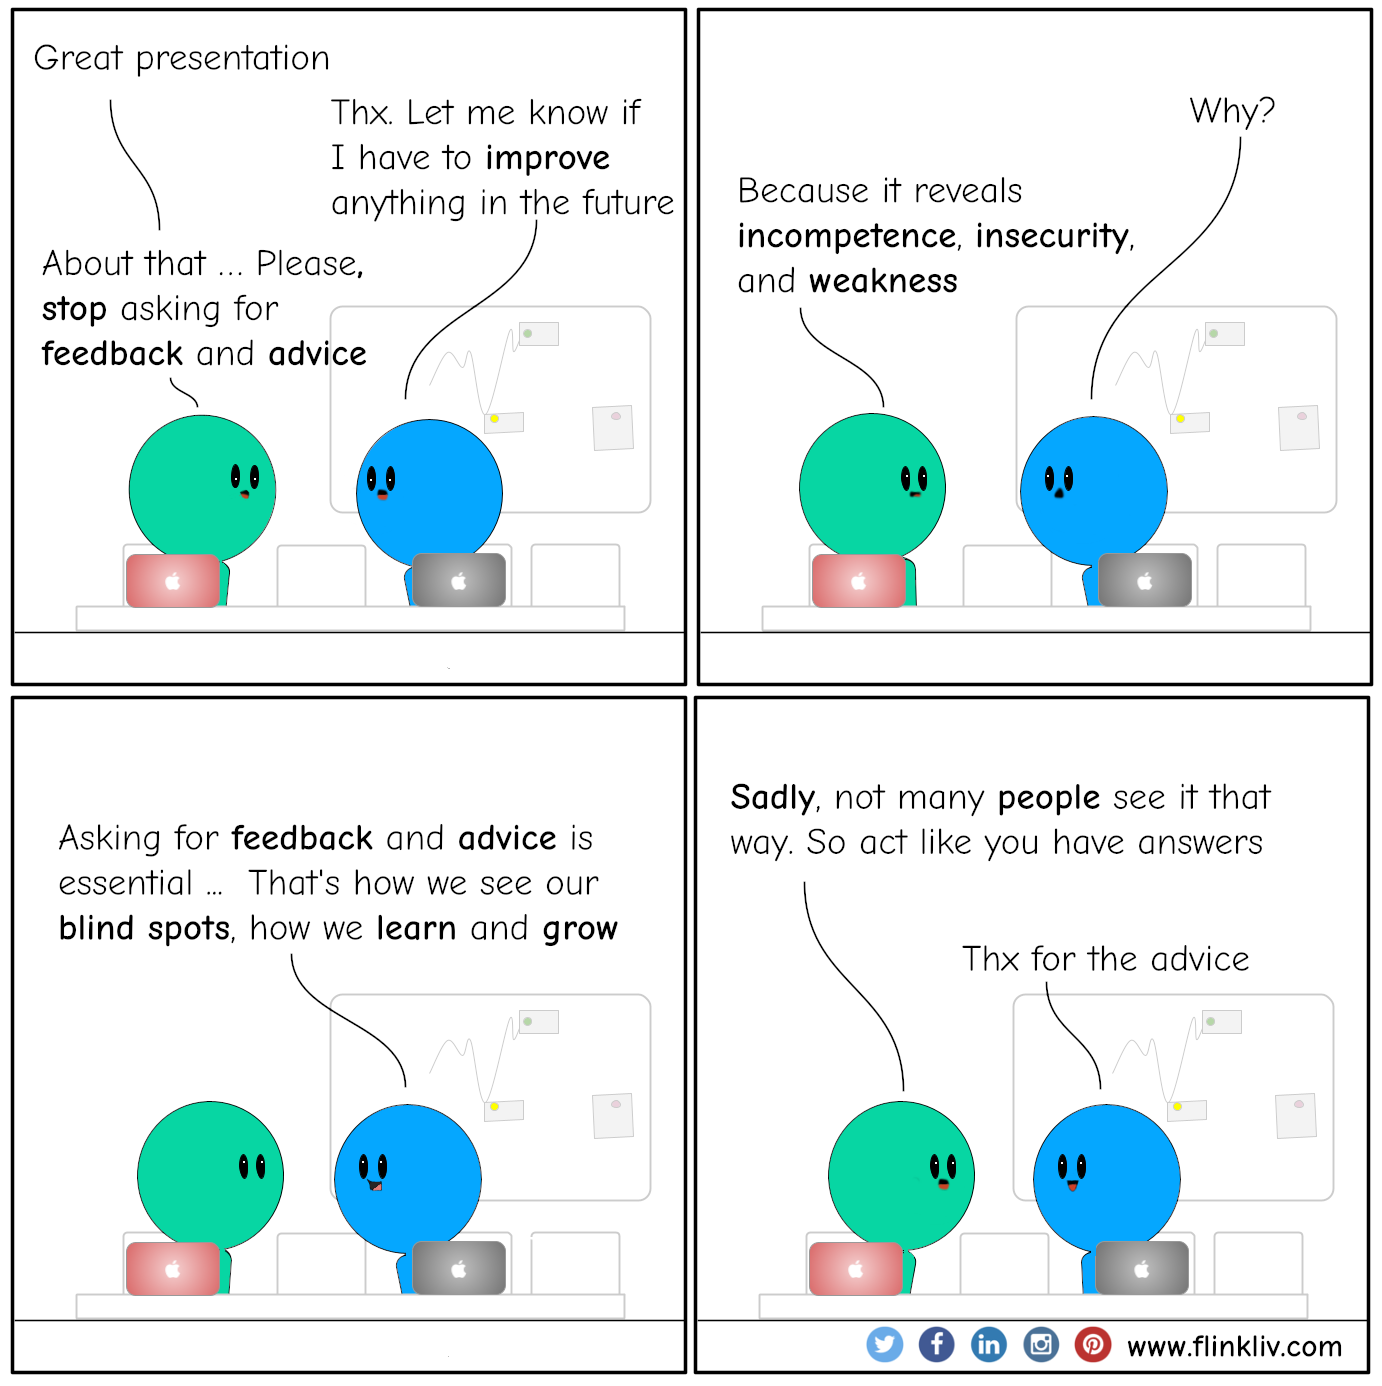 Conversation between A and B about feedback and advice . 
            A:Great presentation. 
            B:Let me know if I have to improve anything in the future.
            A:About that. Please, stop asking for feedback and advice.
            
            B:Why?
            A:Because it reveals incompetence, insecurity, and weakness. 
            
            B:Asking for feedback and advice is essential; that's how we see our blind spots, how we learn and grow.
            
            A:Sadly, not many people see it that way. So act like you have answers.
            B: Thx for the advice.
            
              